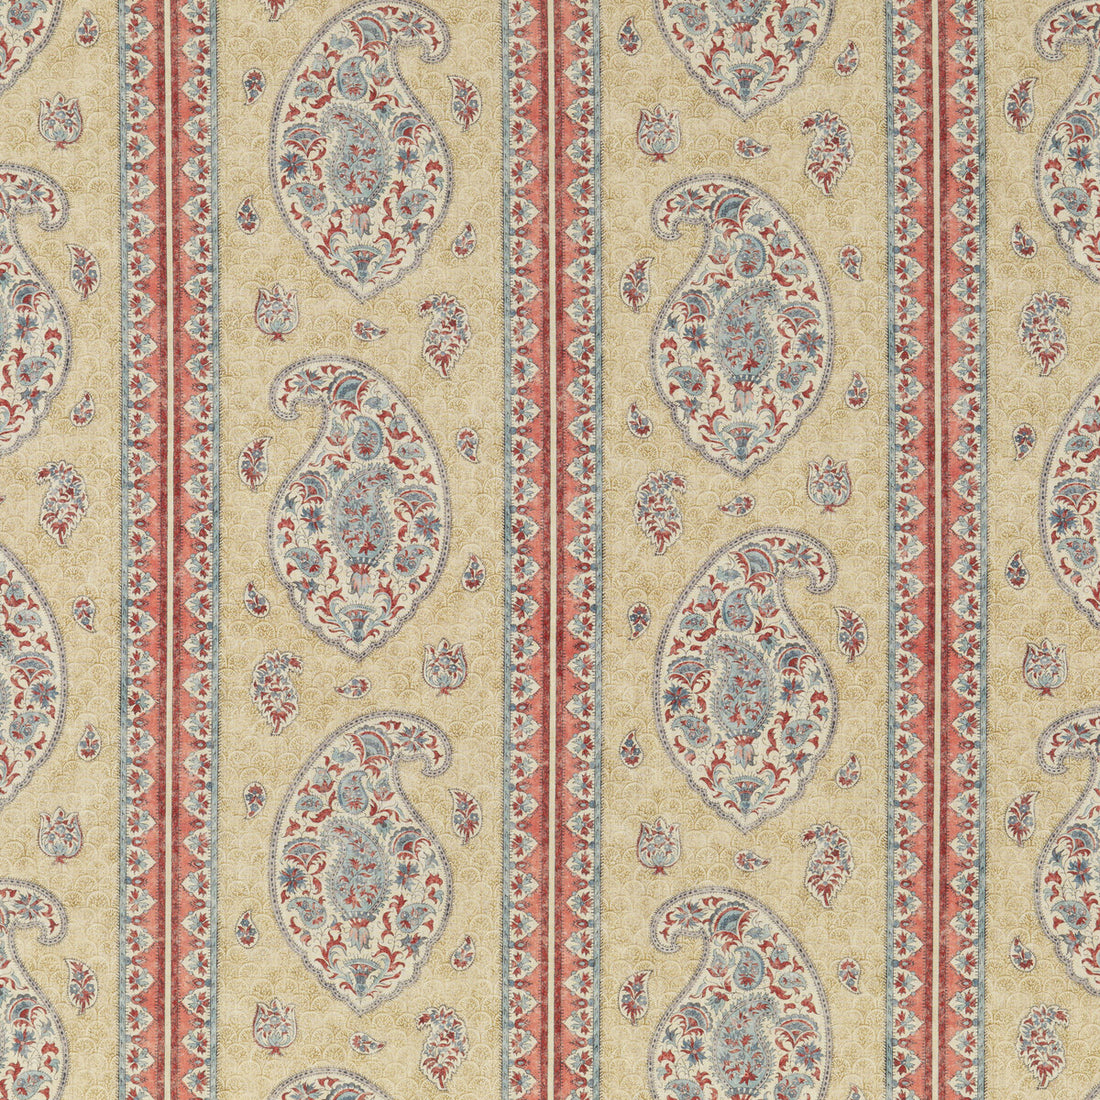 Coromandel fabric in red/blue color - pattern BP10831.1.0 - by G P &amp; J Baker in the Coromandel collection